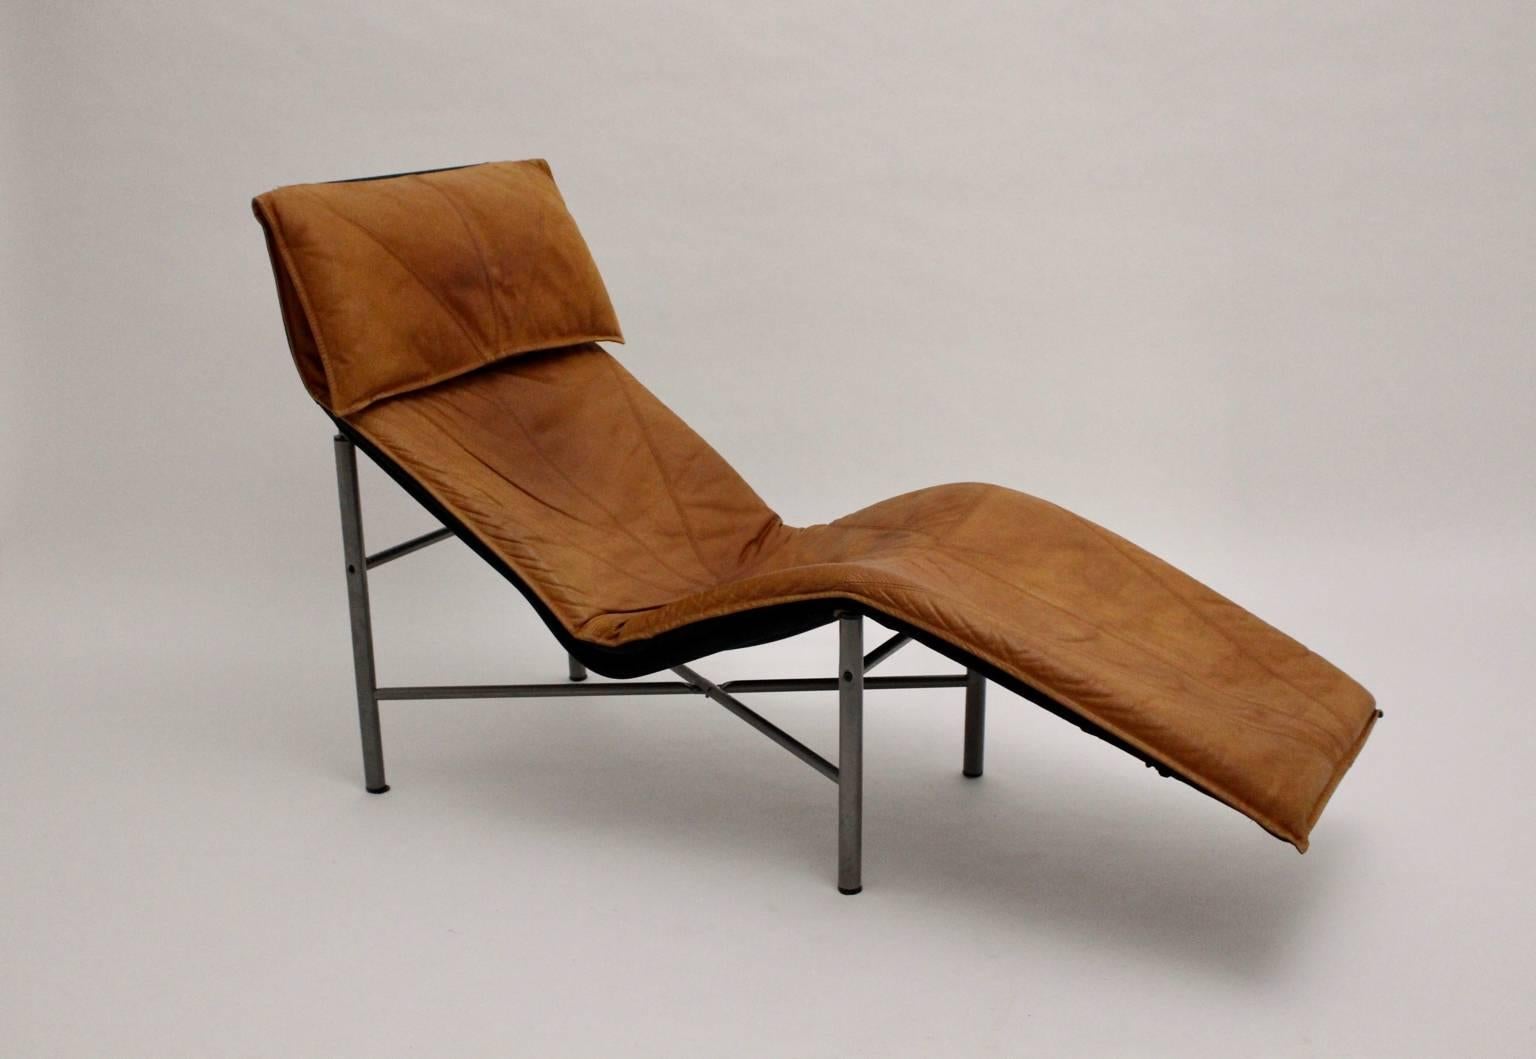 Late 20th Century Cognac Leather Chaise Longue by Tord Bjorklund, 1970, Sweden